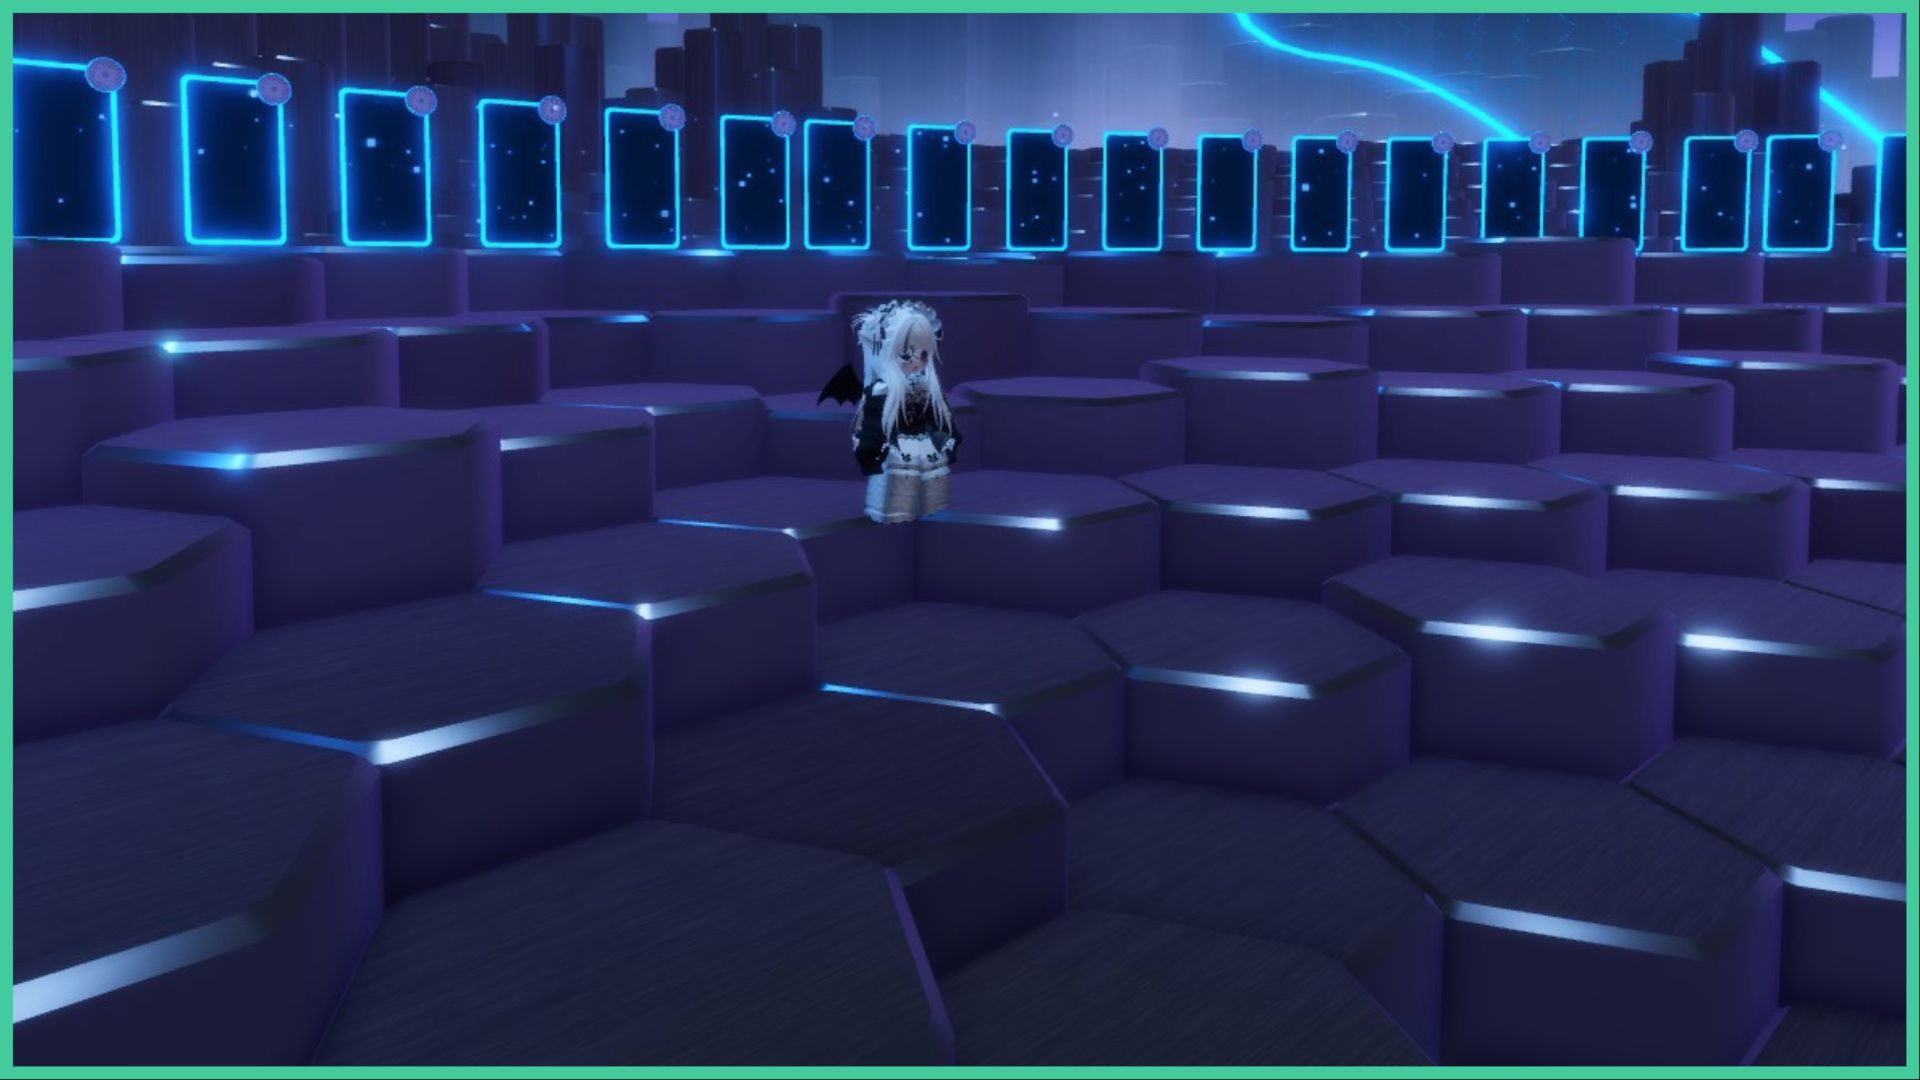 feature image for our easiest the hunt badges guide, the image is a screenshot of a roblox player in the Hunt Awaits experience, standing on the hexagonal flooring as multiple doors with glowing blue outlines stretch across the area, there is a cityscape silhouette in the distance